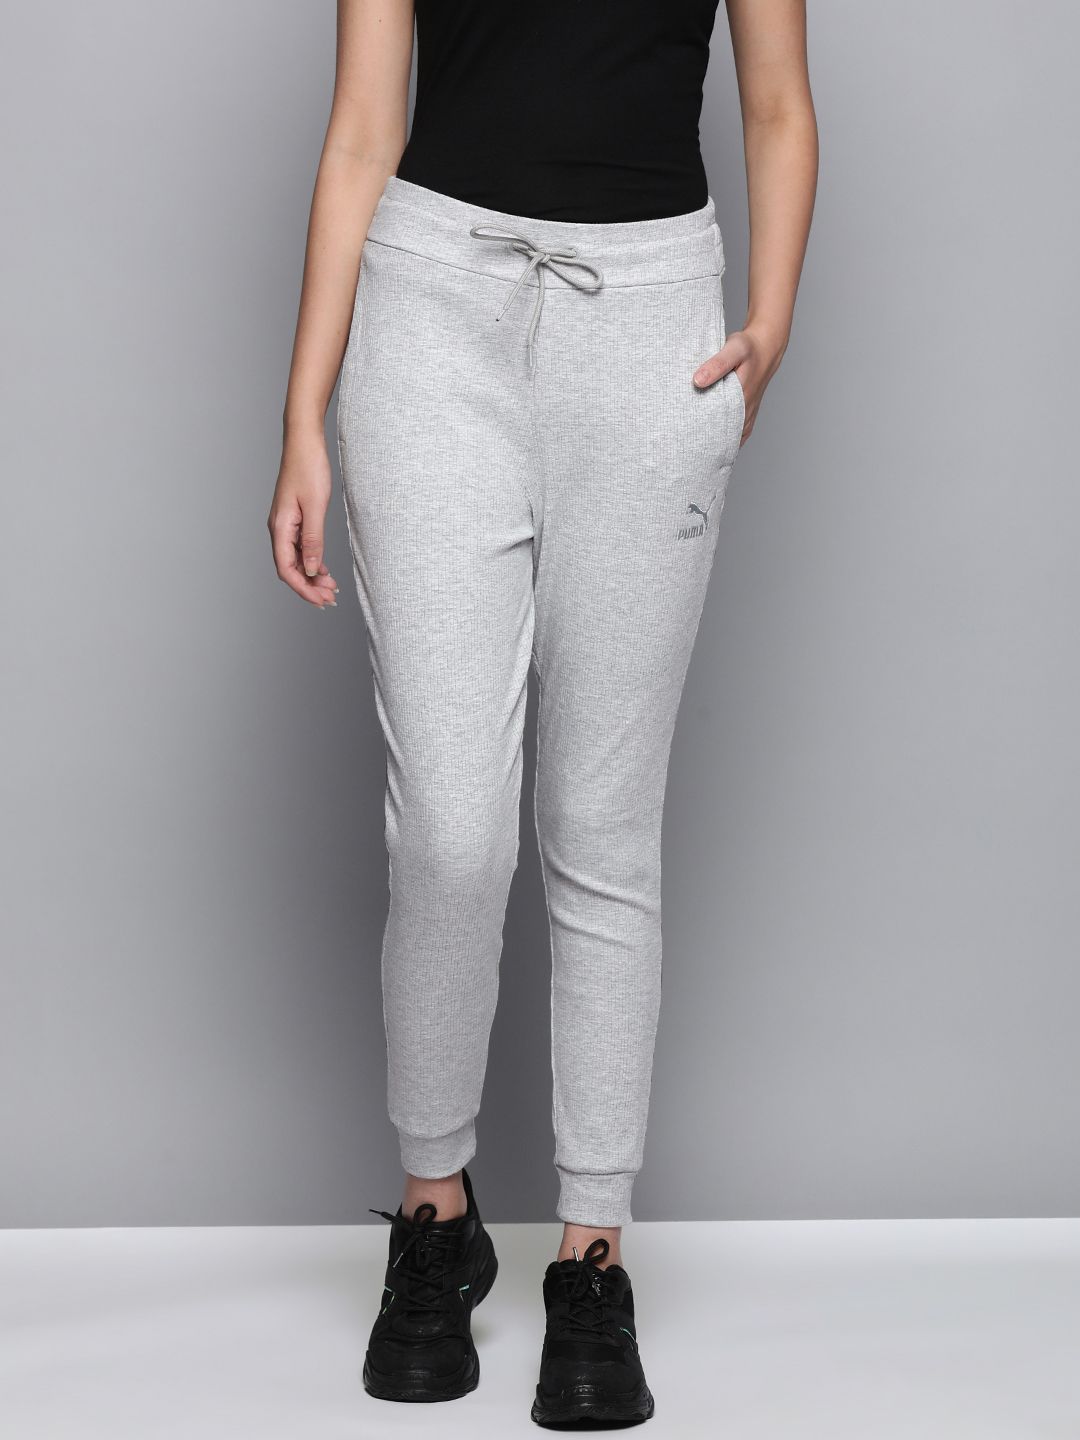 Puma Women Grey Solid Classics Ribbed Slim Fit Sustainable Joggers Price in India